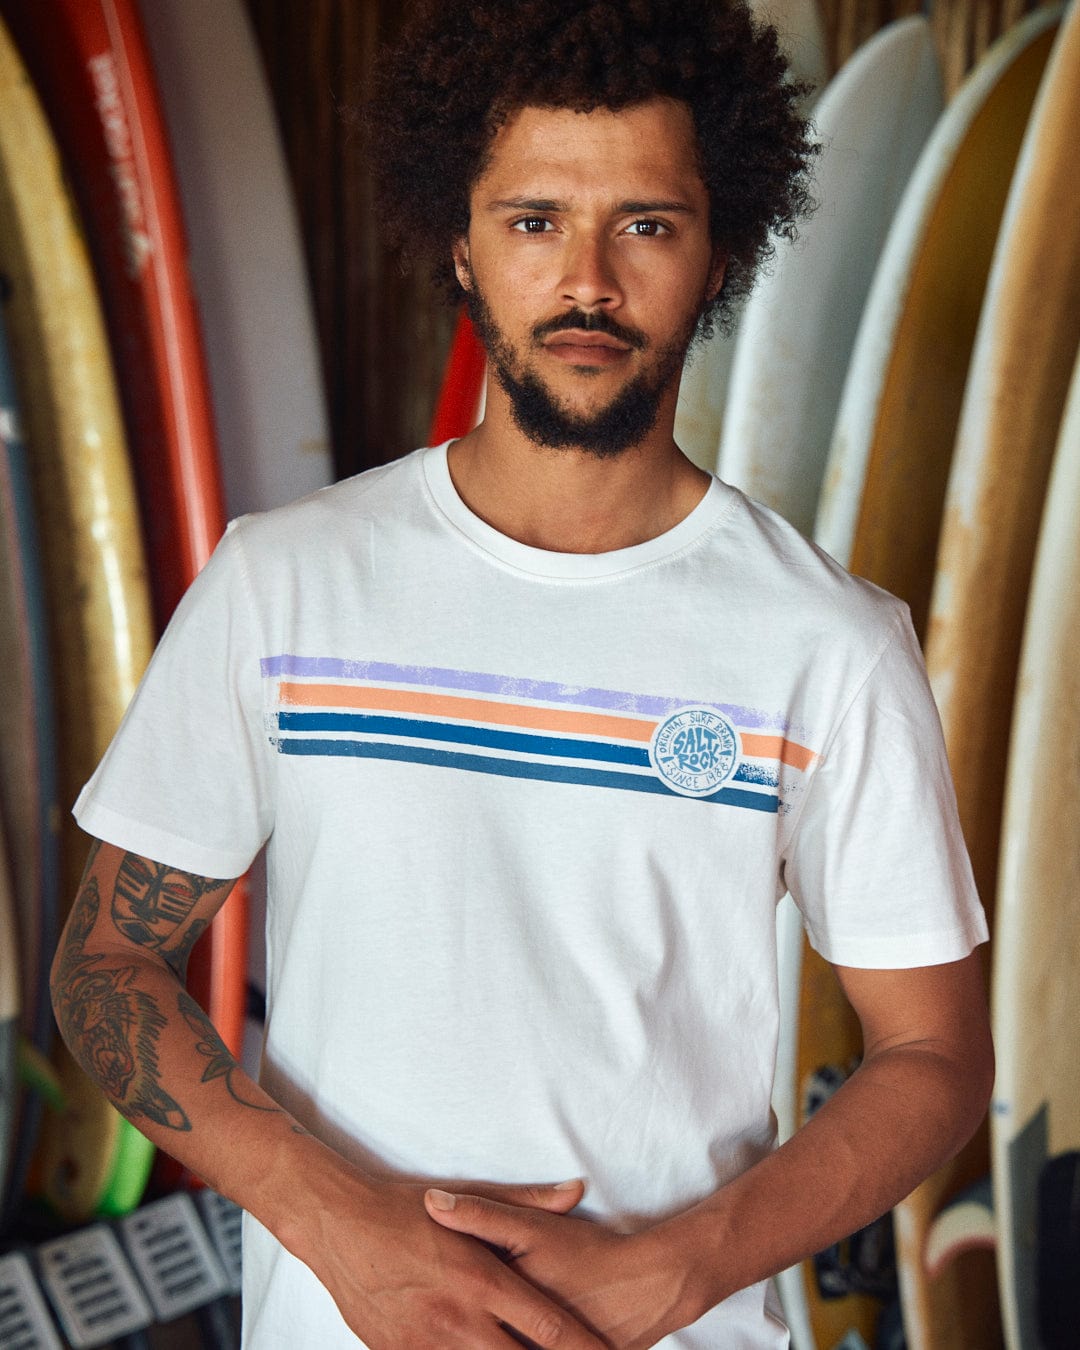 A man with a beard and curly hair stands in front of multiple surfboards, wearing the Spray Stripe - Mens Short Sleeve T-Shirt - White with Saltrock branding.